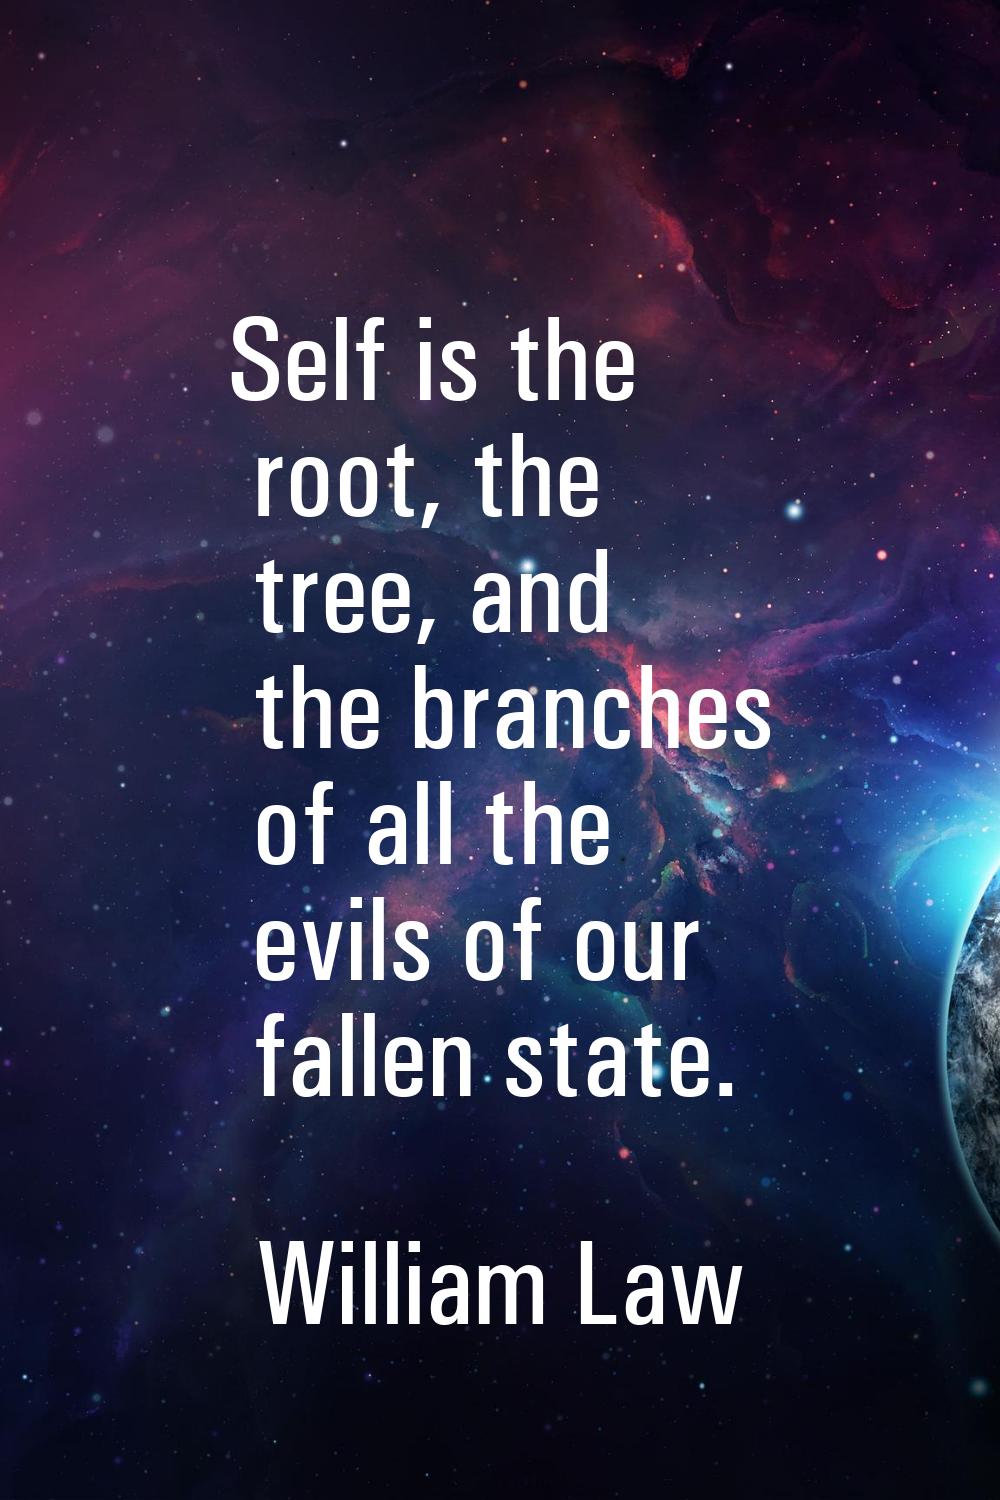 Self is the root, the tree, and the branches of all the evils of our fallen state.